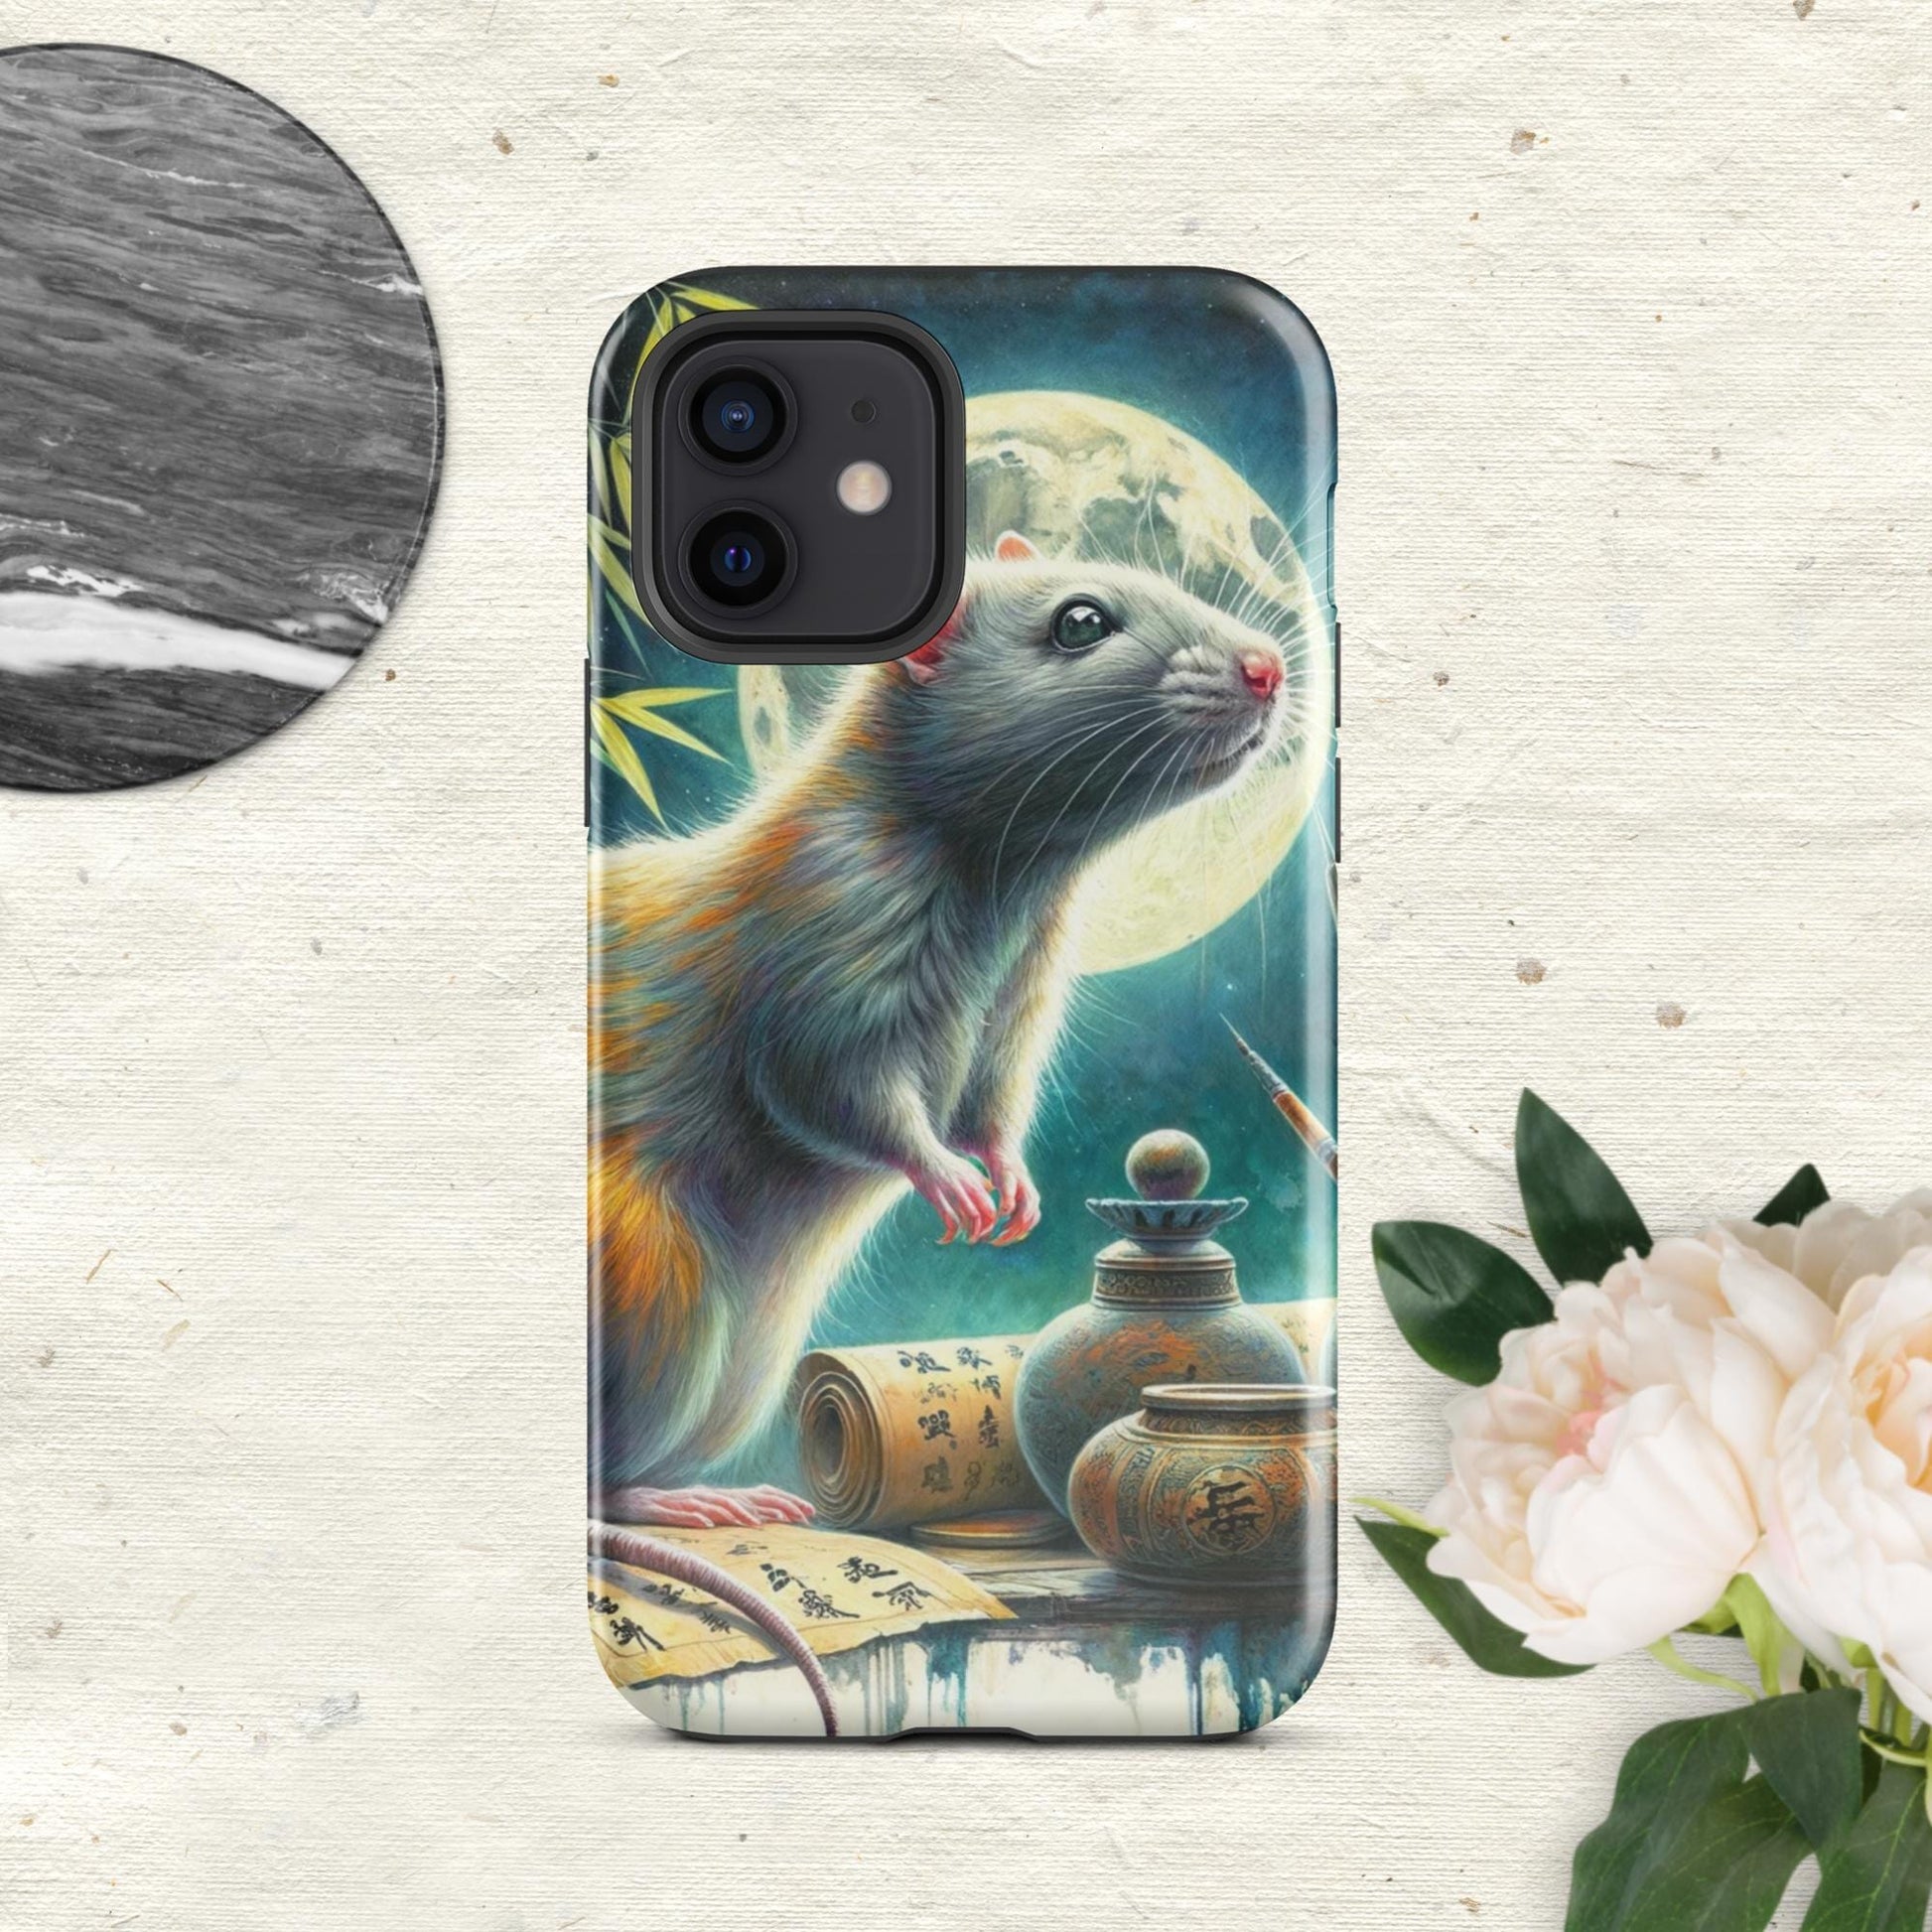 The Hologram Hook Up Glossy / iPhone 12 Rat Tough Case for iPhone®